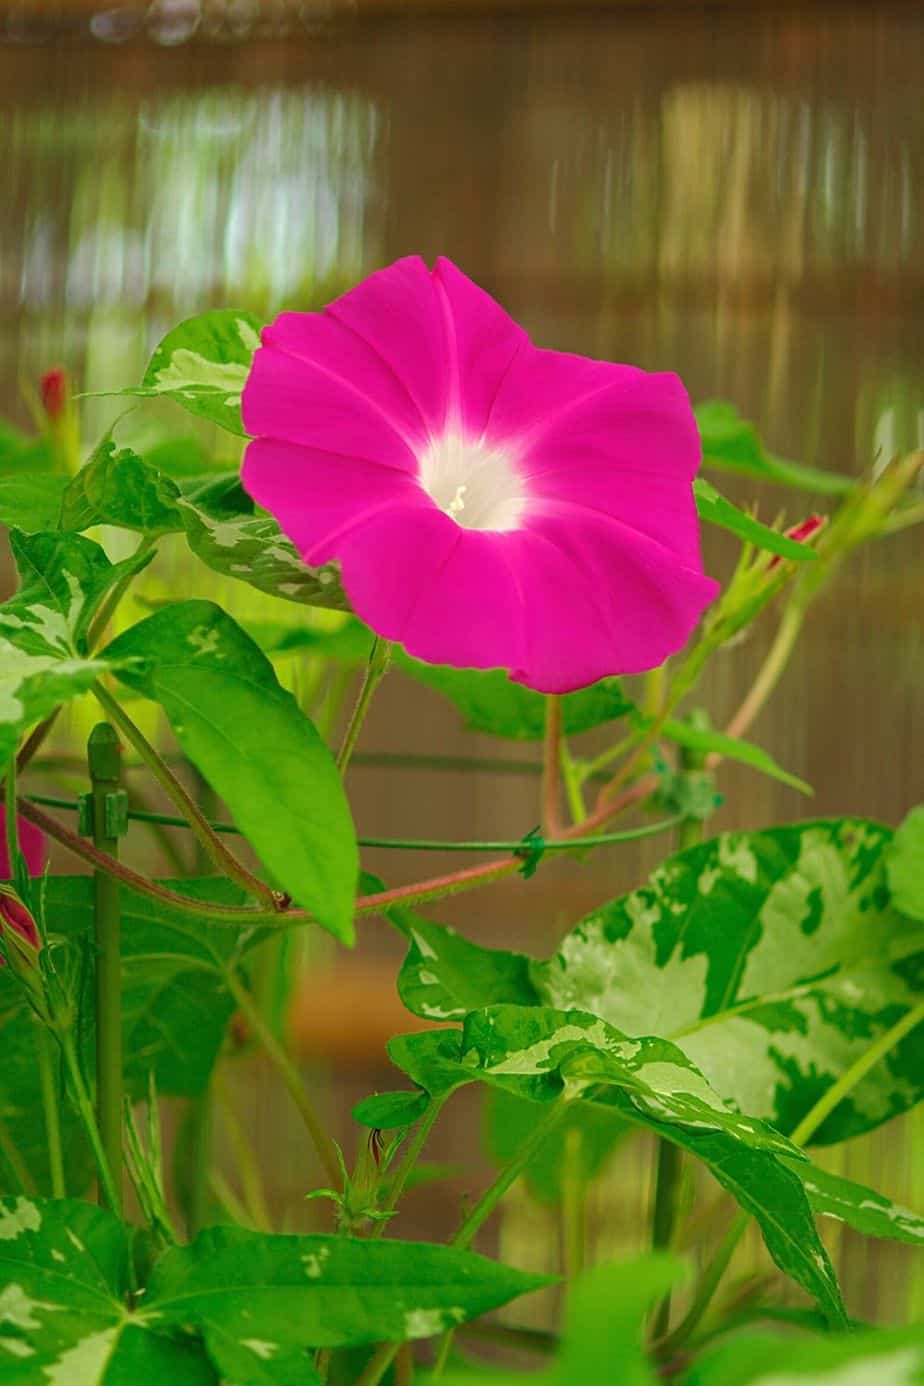 Morning Glory is a gorgeous flower you can grow in a pot from early summer to early winter on an east-facing balcony